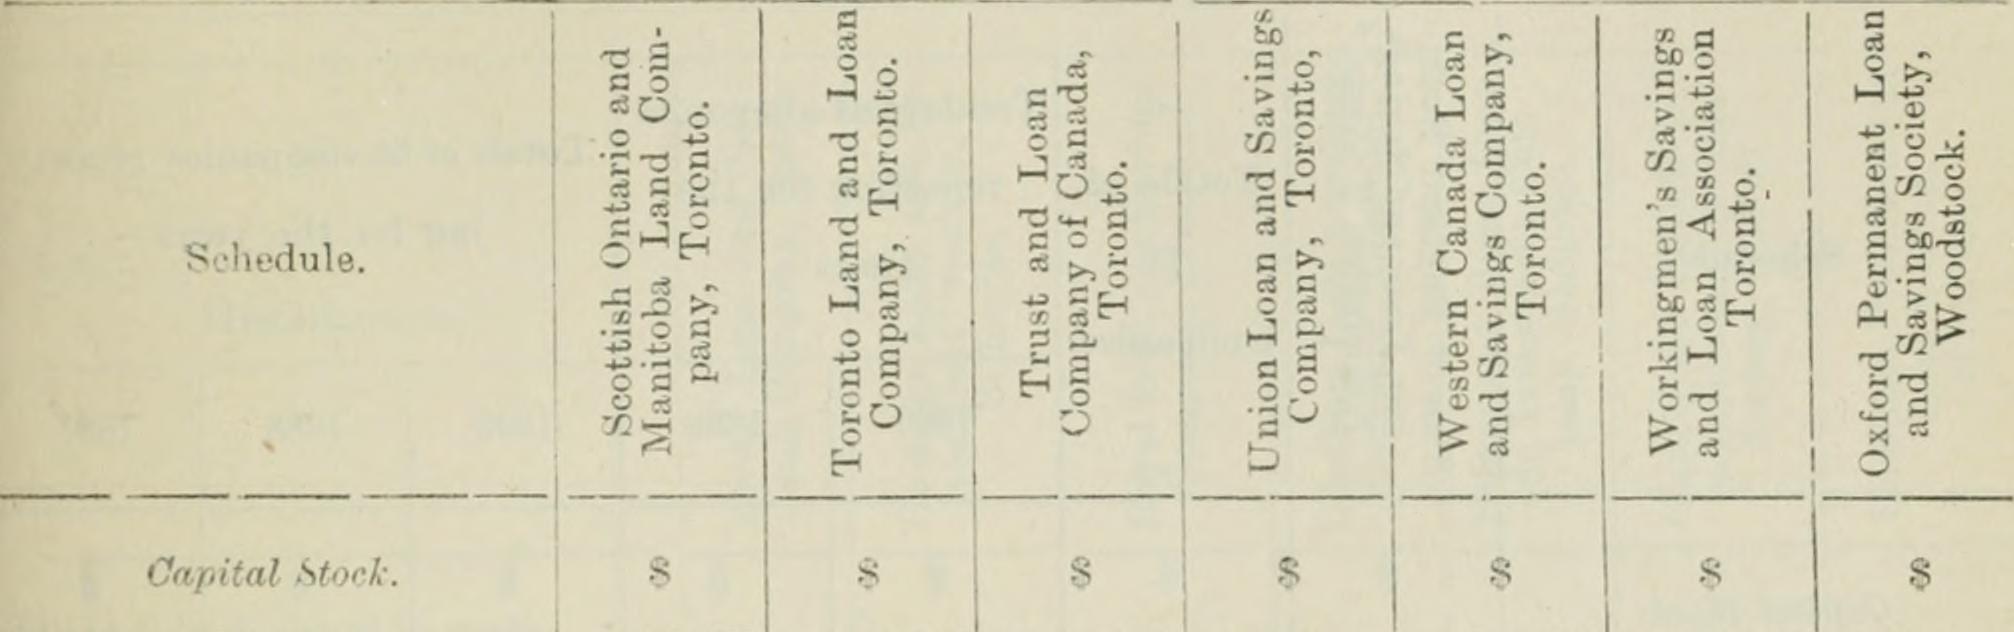 Image from page 600 of "Ontario Sessional Papers, 1890, No.72-87" (1890)